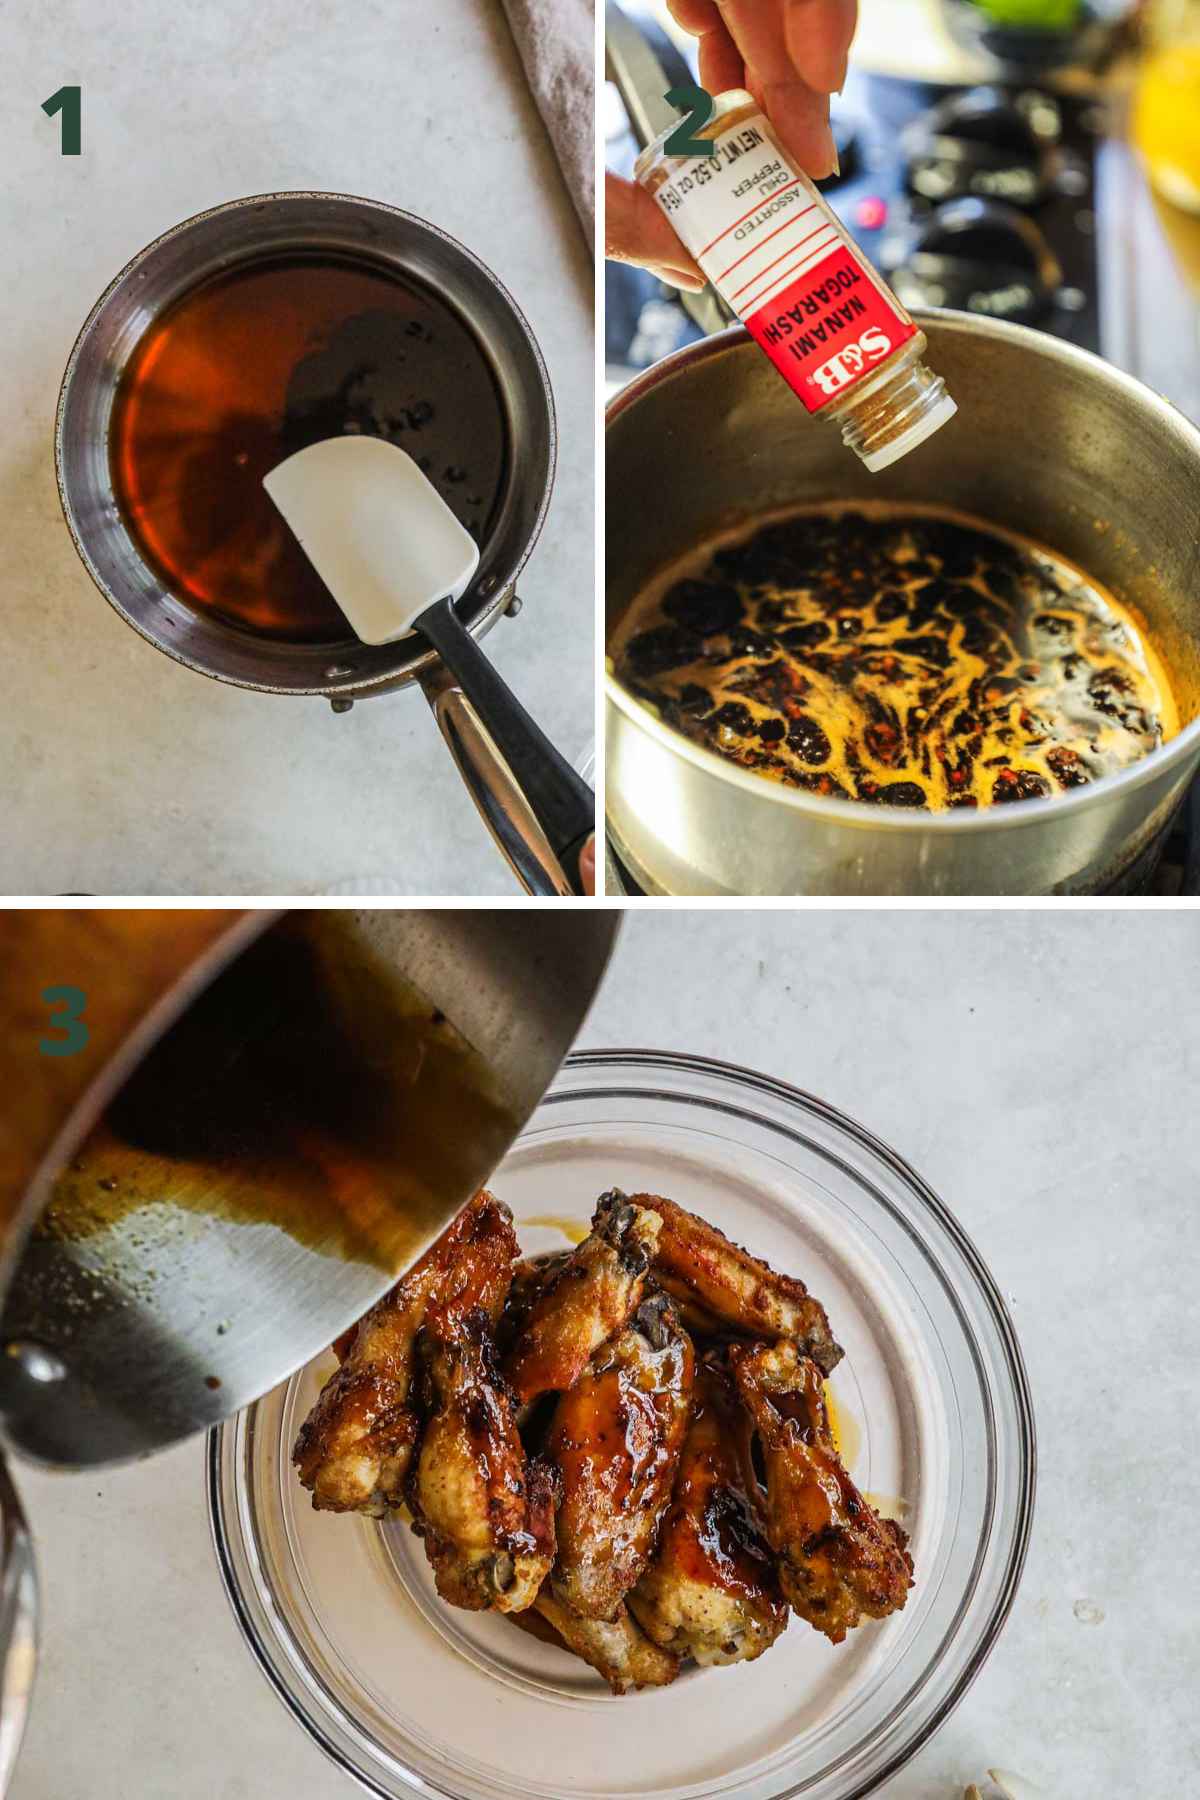 Steps to make honey soy garlic sauce, including mixing and cooking mirin, honey, soy sauce, water, and garlic, then stirring in togarashi or chili flake, and using as a glaze or marinade.